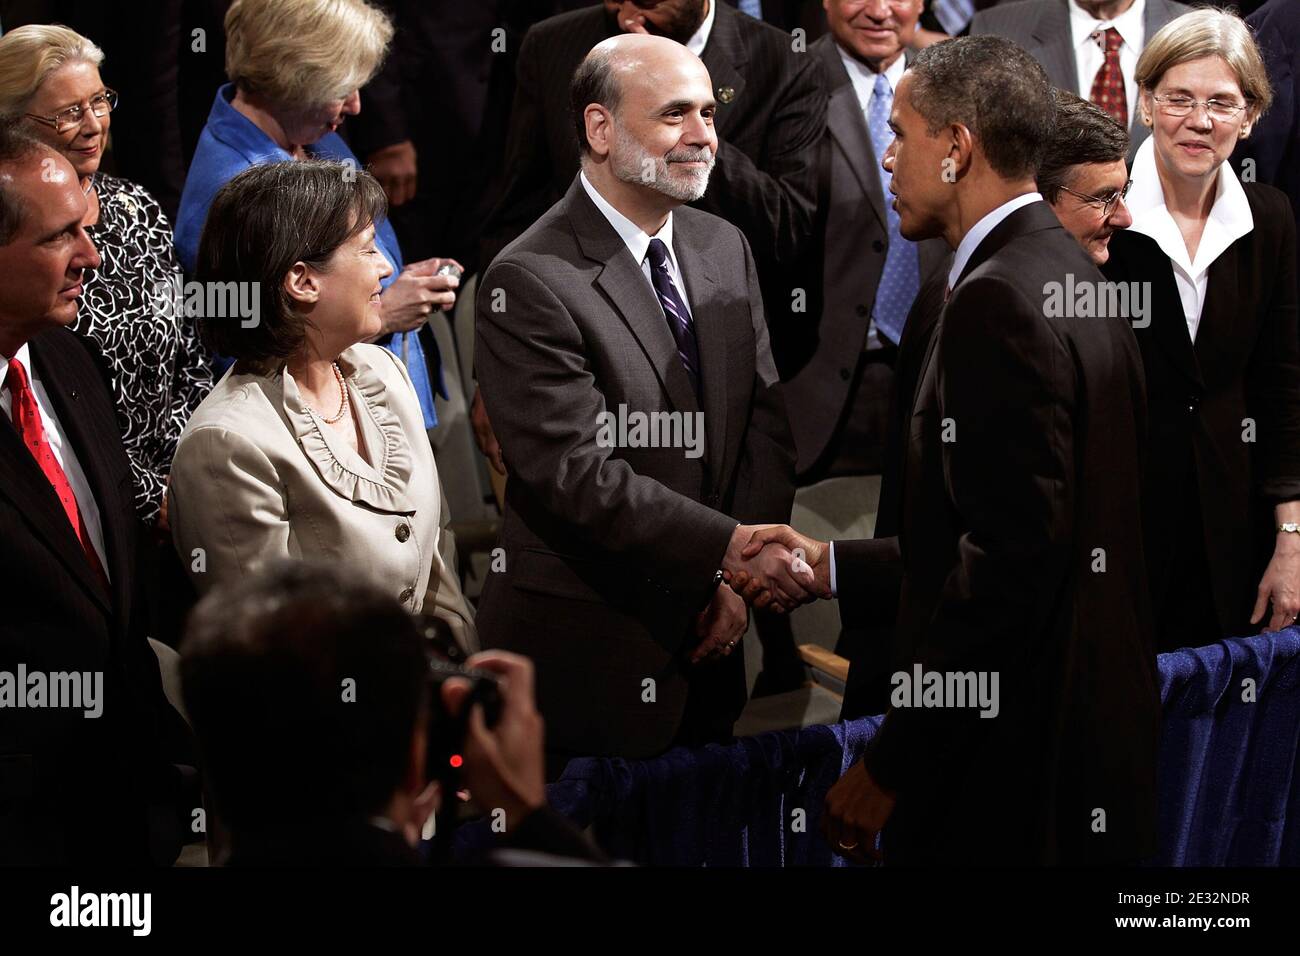 'U.S. President Barack Obama shakes hands with Federal Reserve Bank Chairman Ben Bernanke (C) as FDIC Chair Sheila Bair (2nd L) looks on after Obama signed the the financial reform bill into law during a ceremony at the Ronald Reagan Building and International Trade Center July 21, 2010 in Washington, DC. A sweeping expansion of federal financial regulation in the wake of the worst recession since the Great Depression, the bill will create a consumer protection agency, lay out a blueprint for disassembling financial entities considered ''too big to fail,'' and many other reforms. Photo by Win Stock Photo